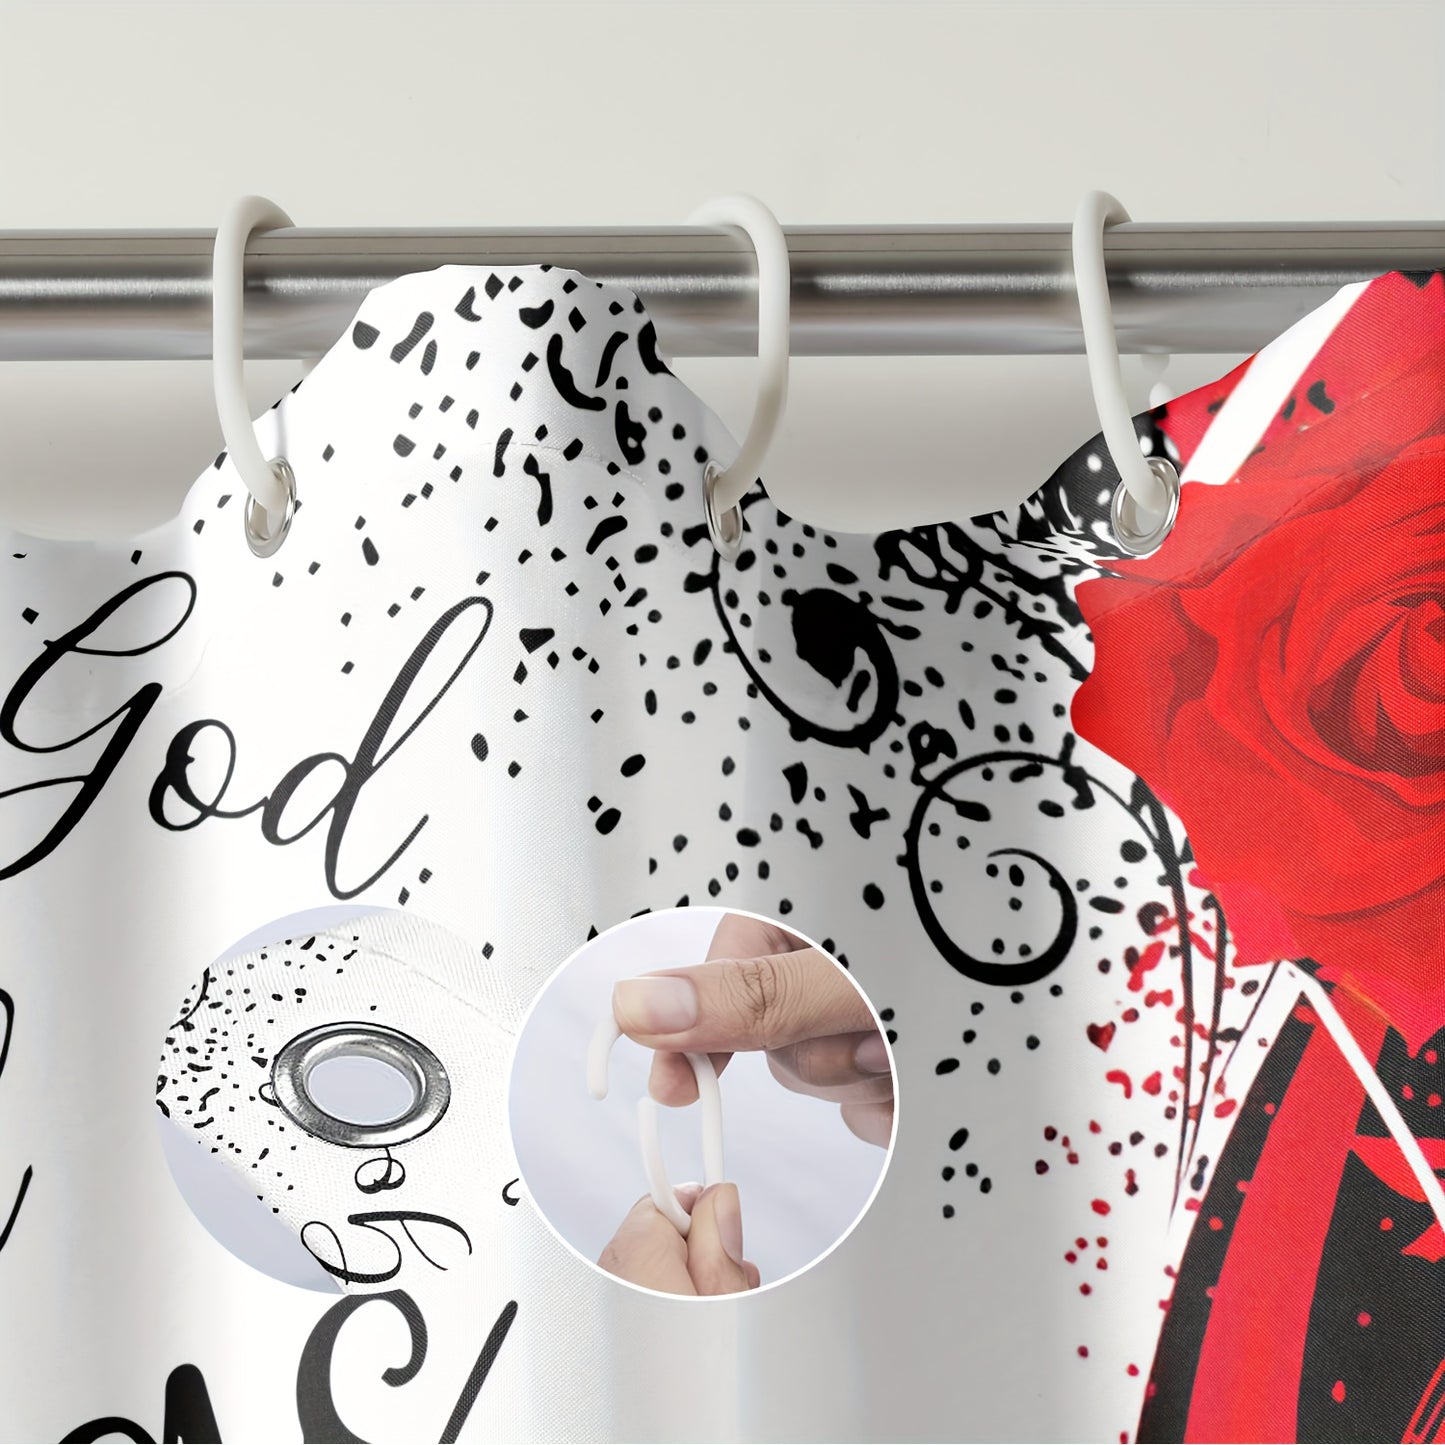 1/4pcs With God All Things Are Possible (Red Rose) Christian Shower Curtain Set, , Bath Mat, Contour Mat, Toilet Cover, Fabric Waterproof Bath Curtain claimedbygoddesigns